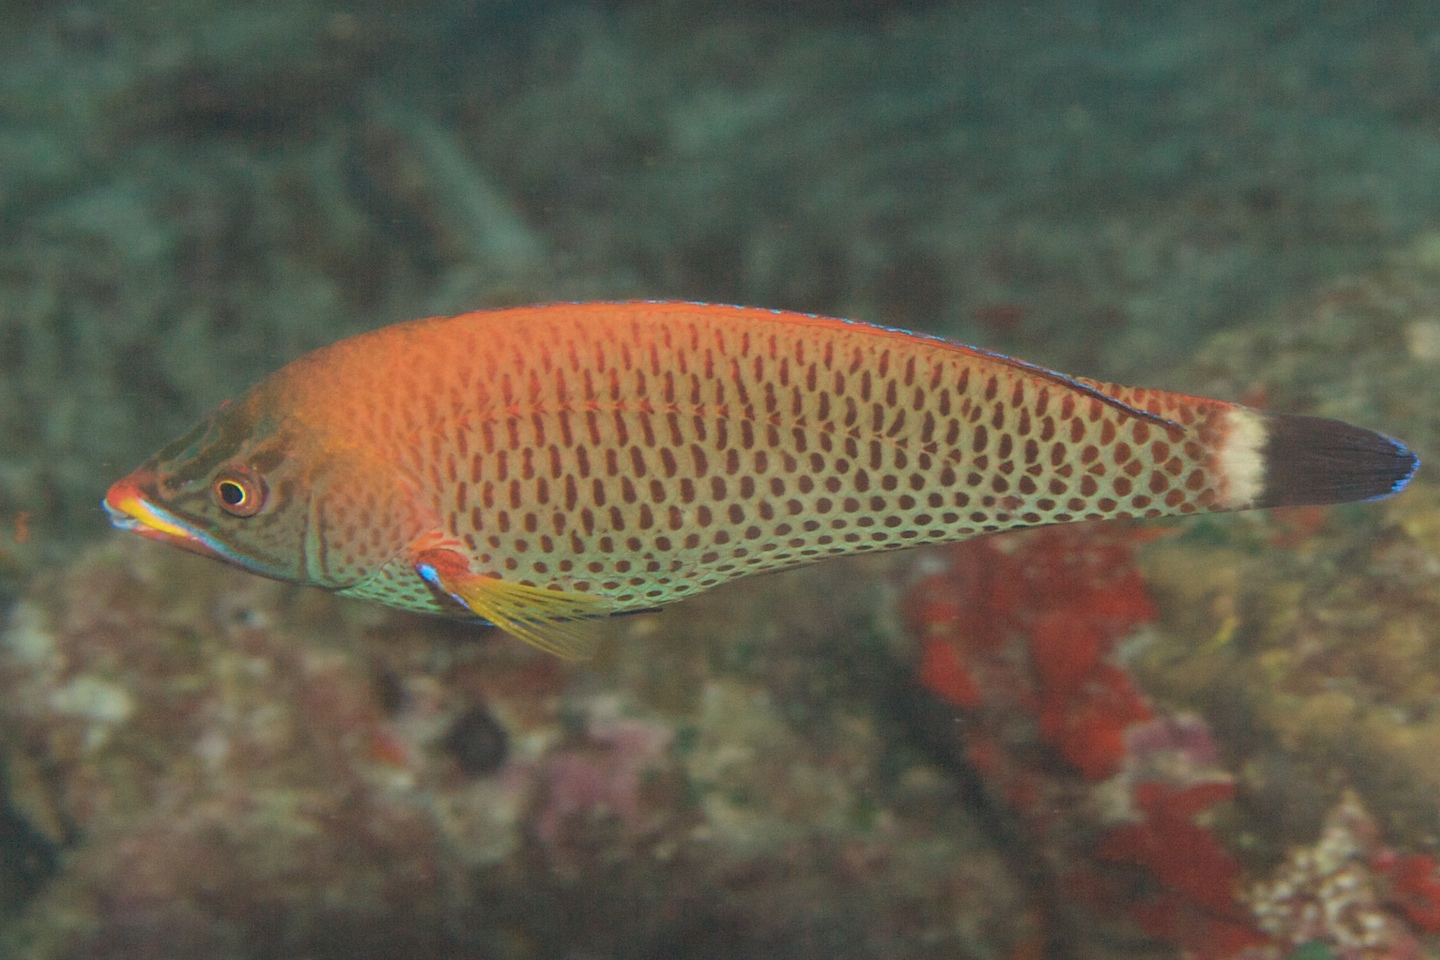 Chiseltooth wrasse